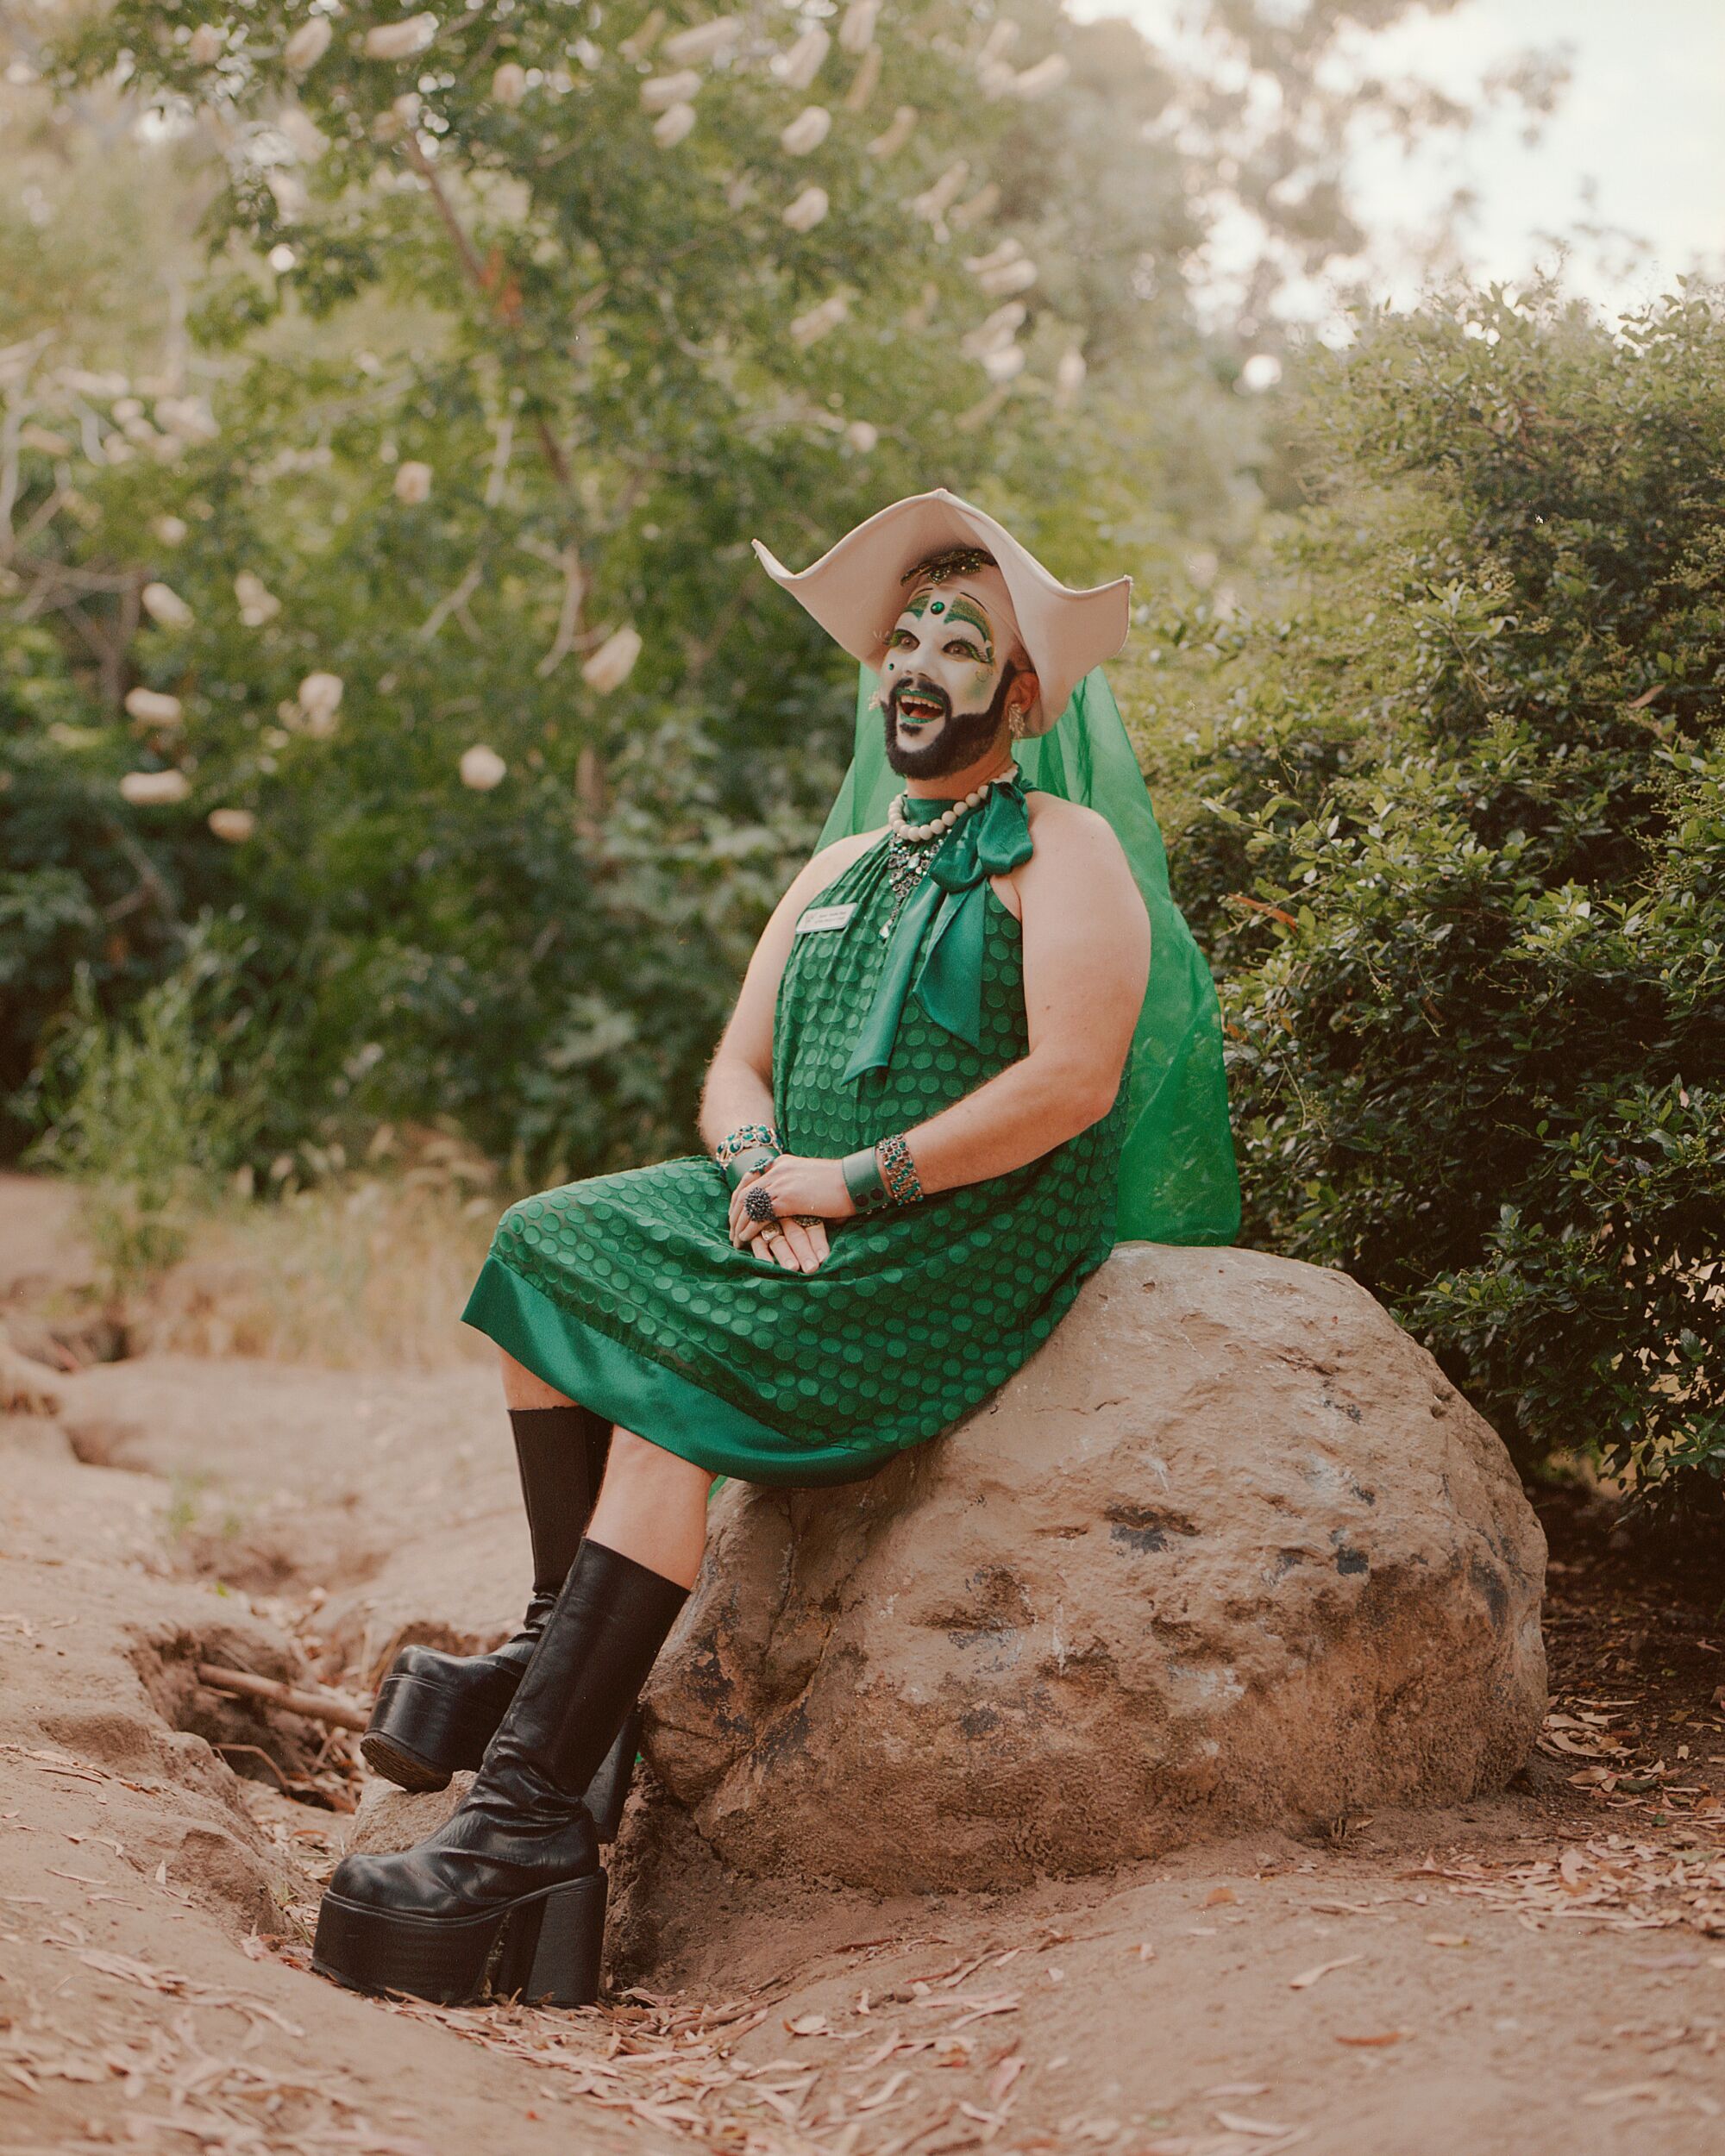 A drag nun in a green dress and boots sits on a boulder outdoors.